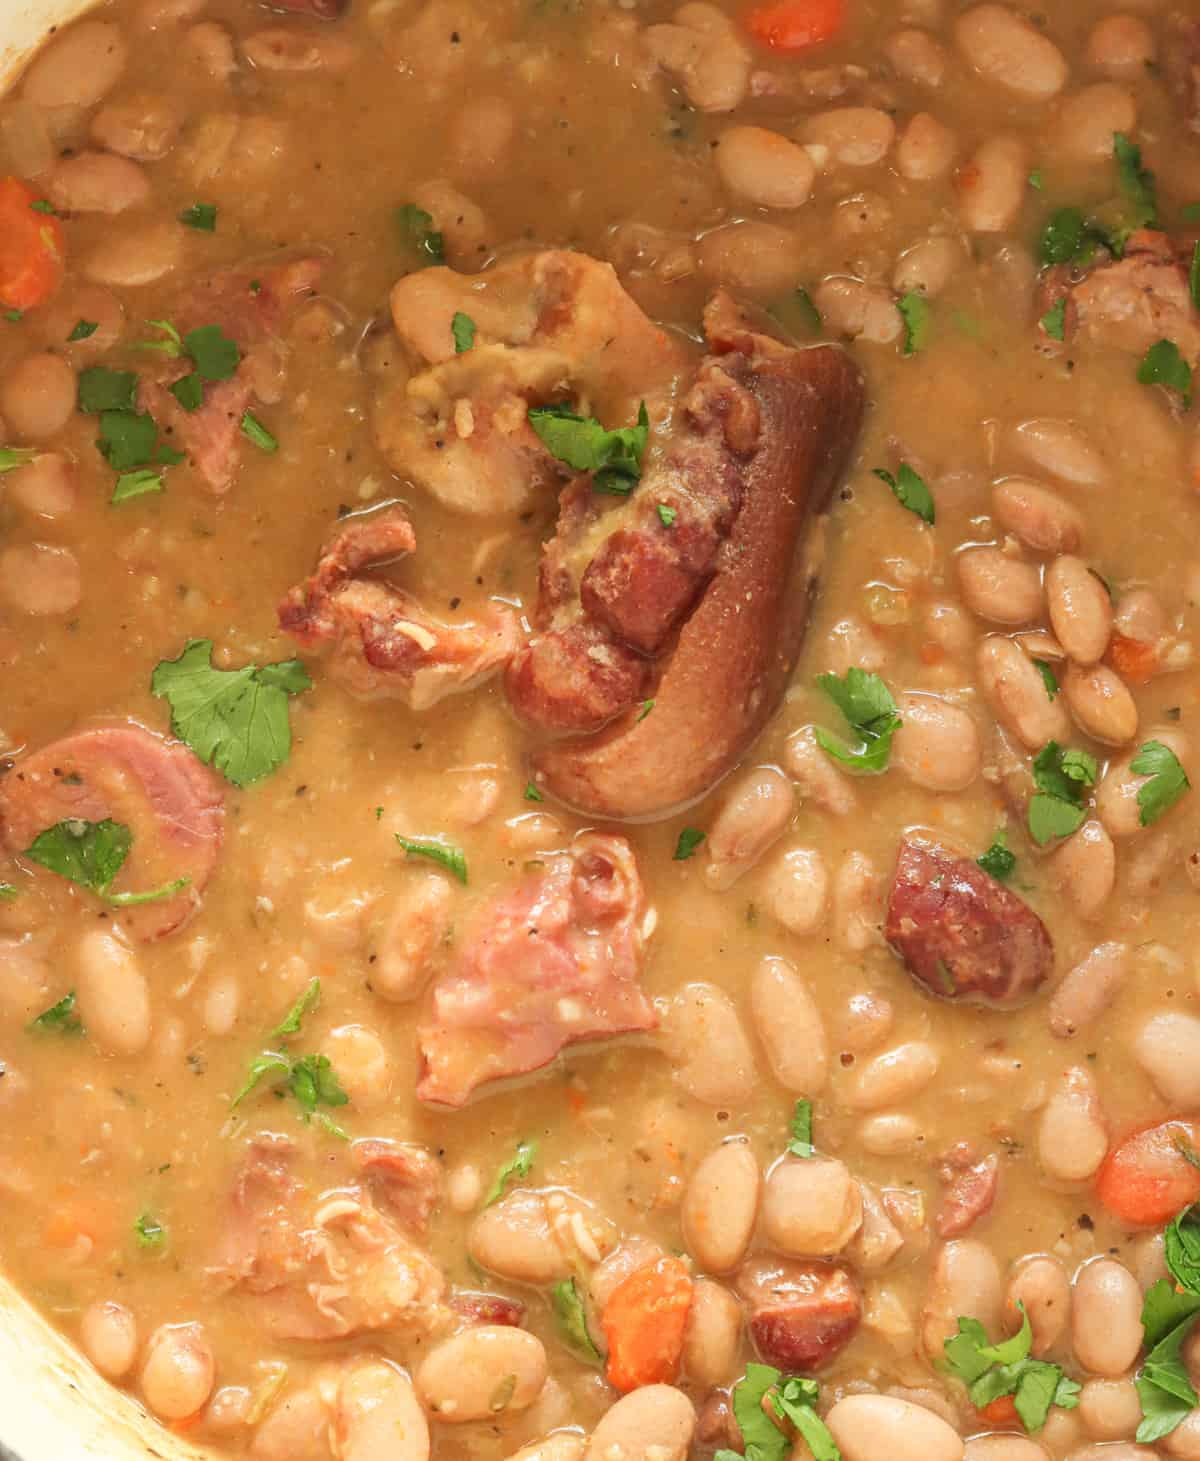 Insanely delicious ham hocks and beans